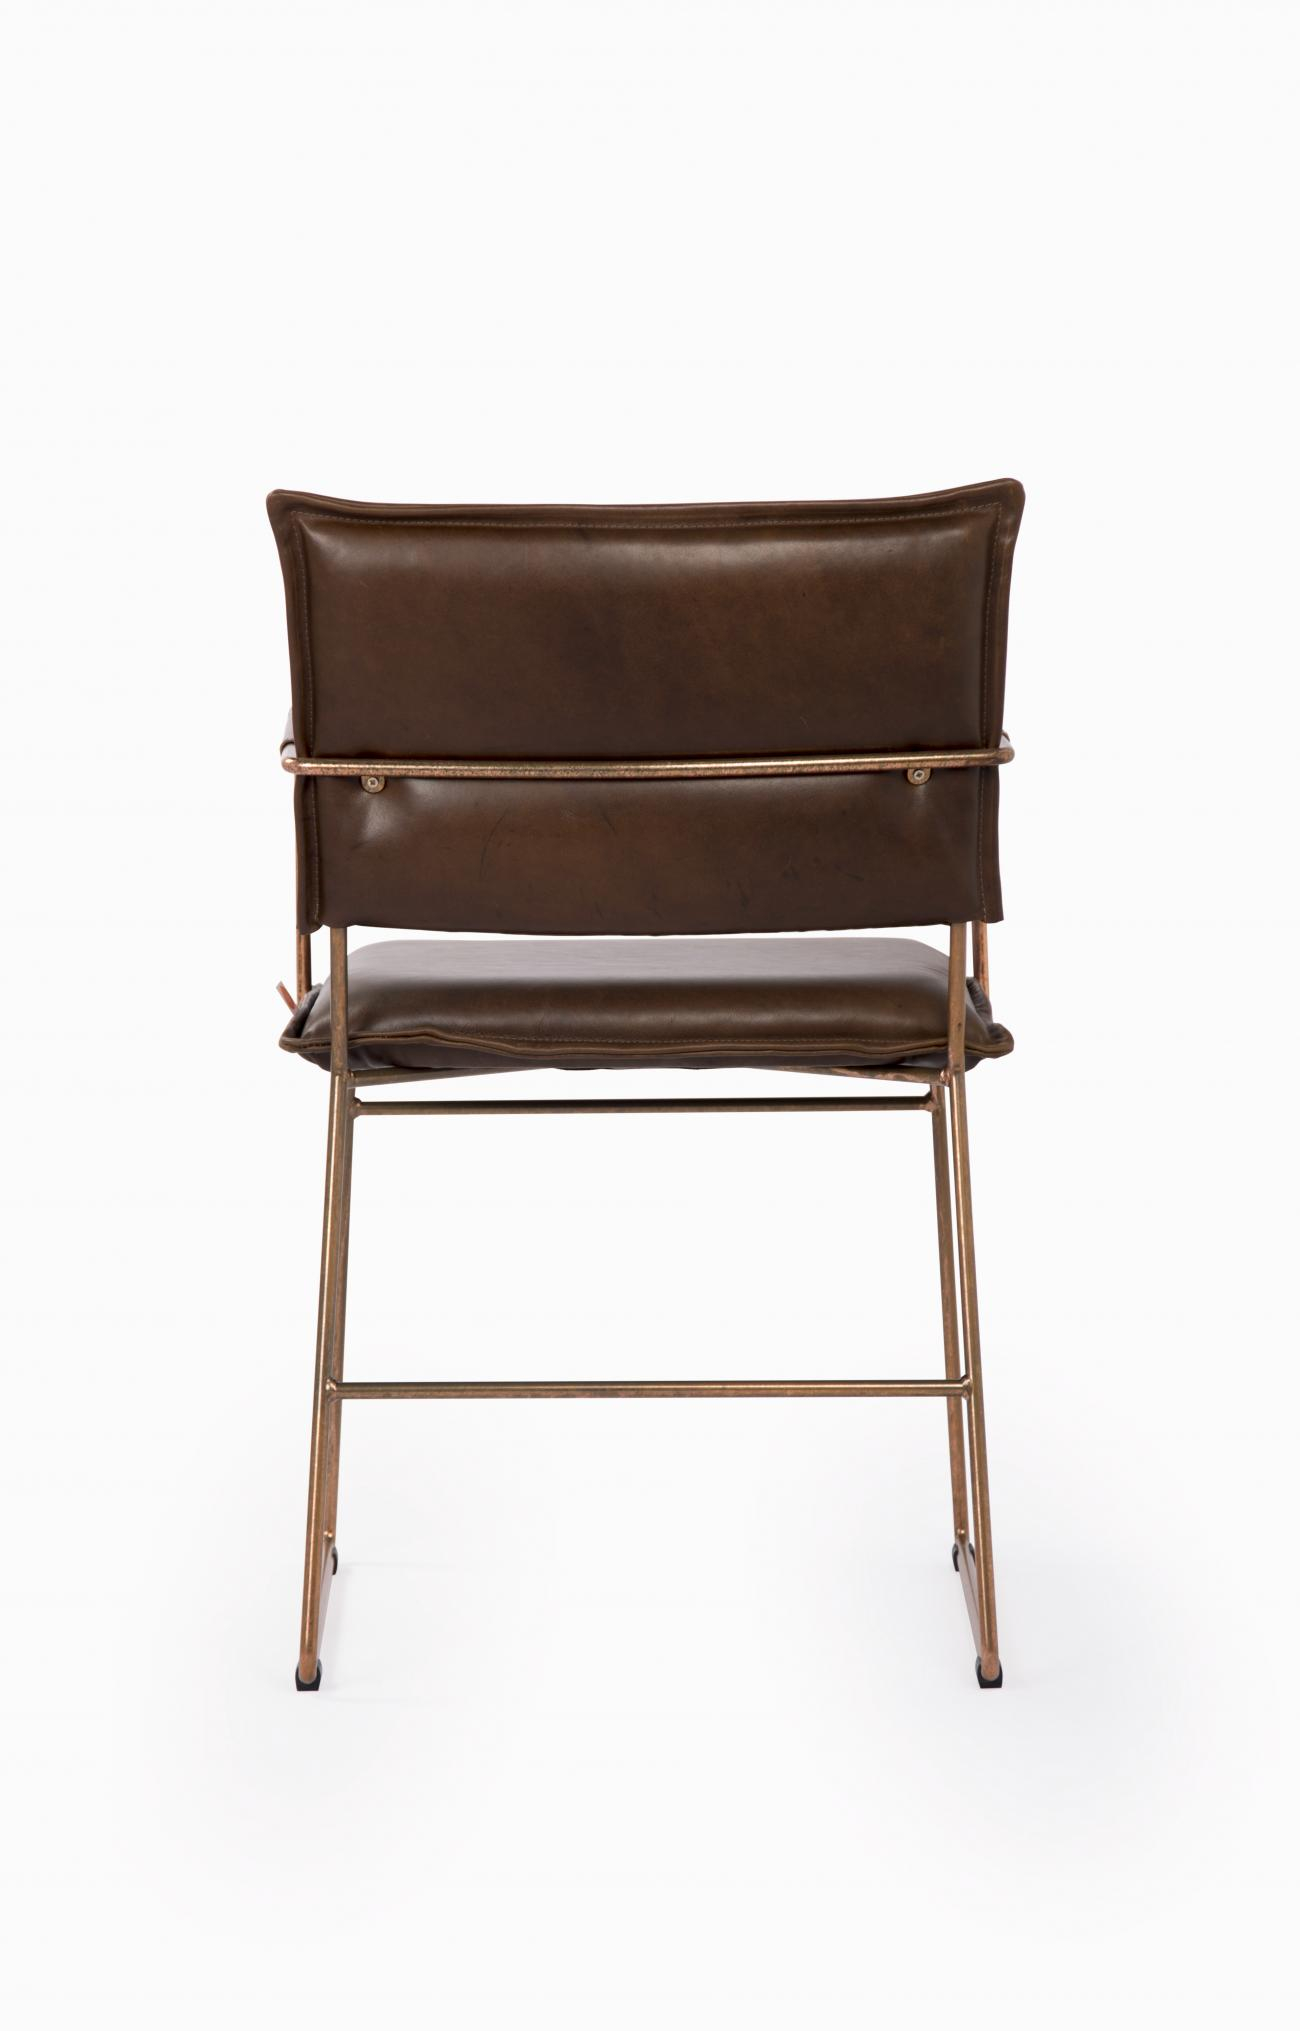 https://www.fundesign.nl/media/catalog/product/n/o/norman_diningchair_with_arm_copper_frame_luxor_fango_back.jpg